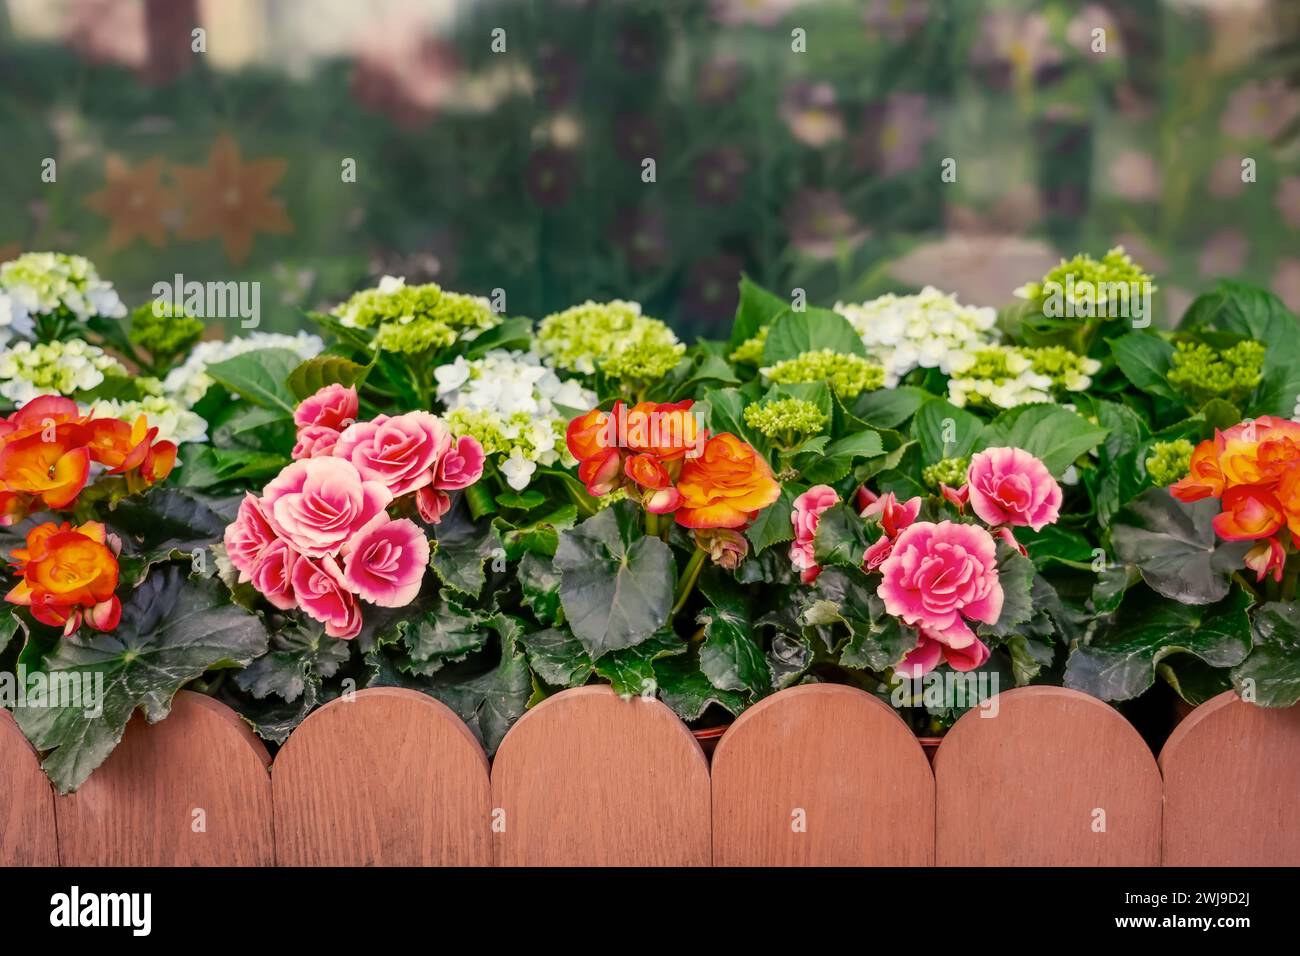 Bright flowers of tuberous begonias tuberhybrida in garden, cute flowerbed with a beautiful stylish wooden fence. Stock Photo